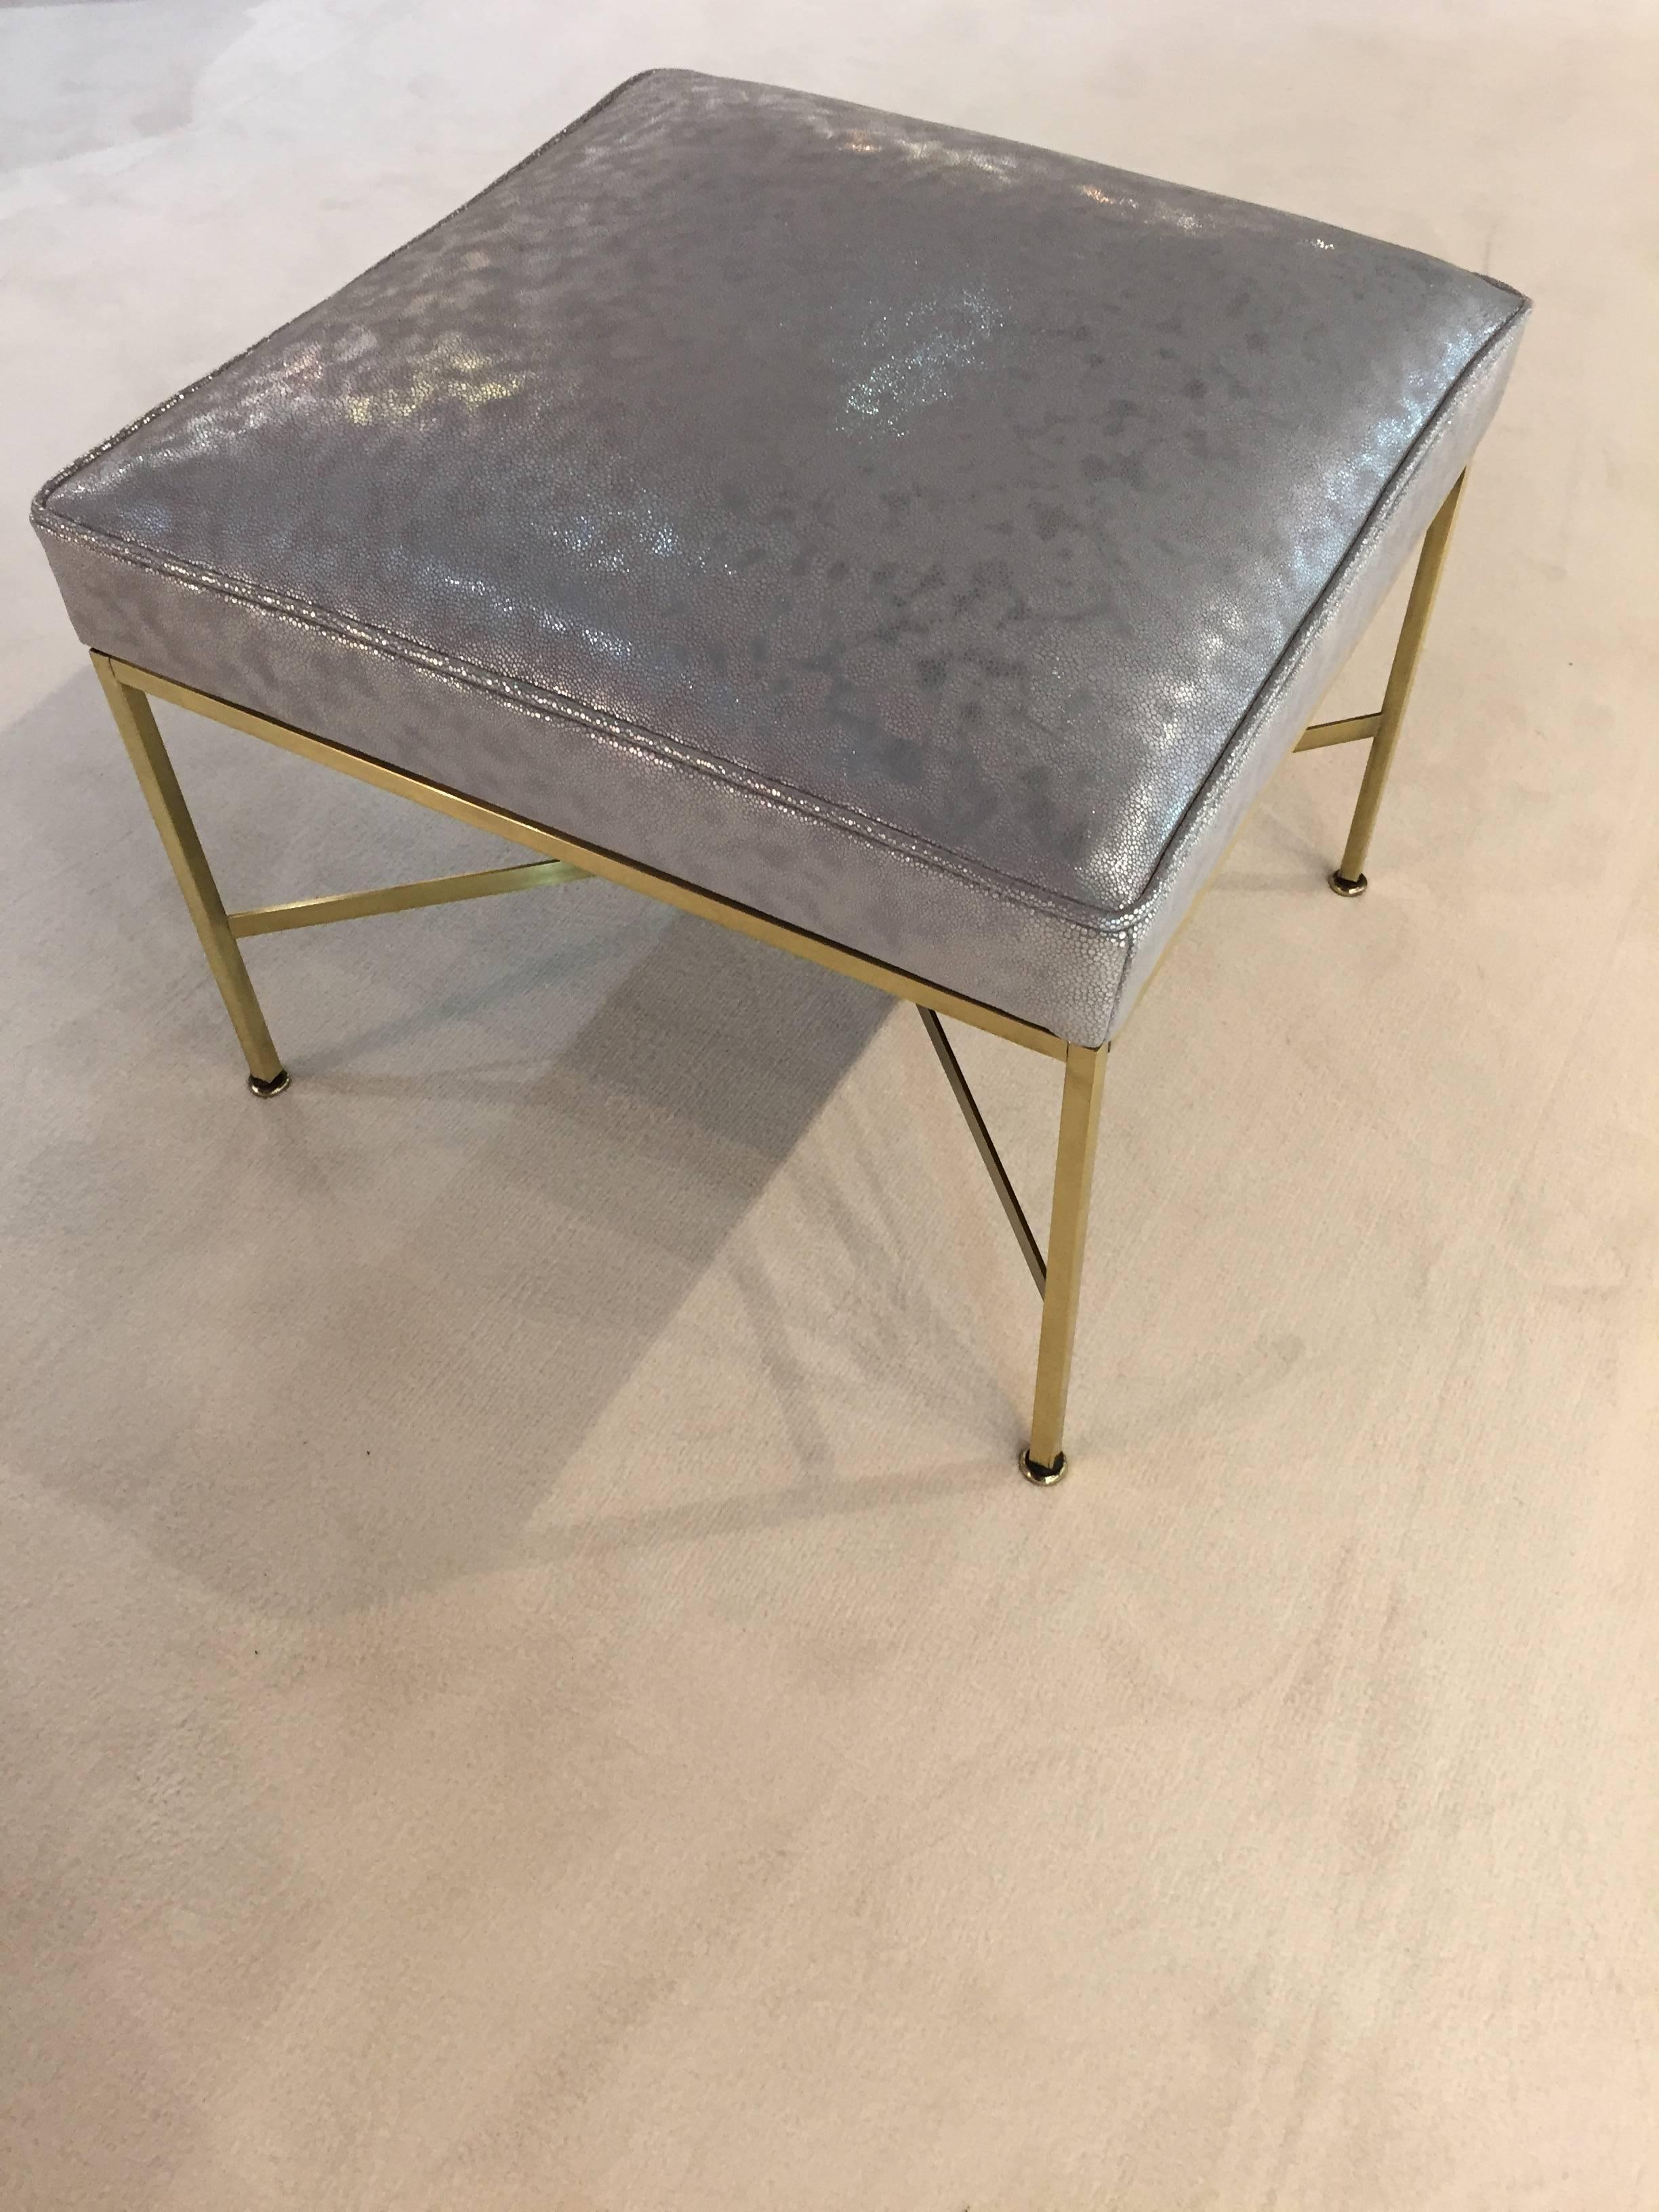 Pair of Paul McCobb brass stools, shagreen silver leather, with brass criss-cross bases, adjustable feet.